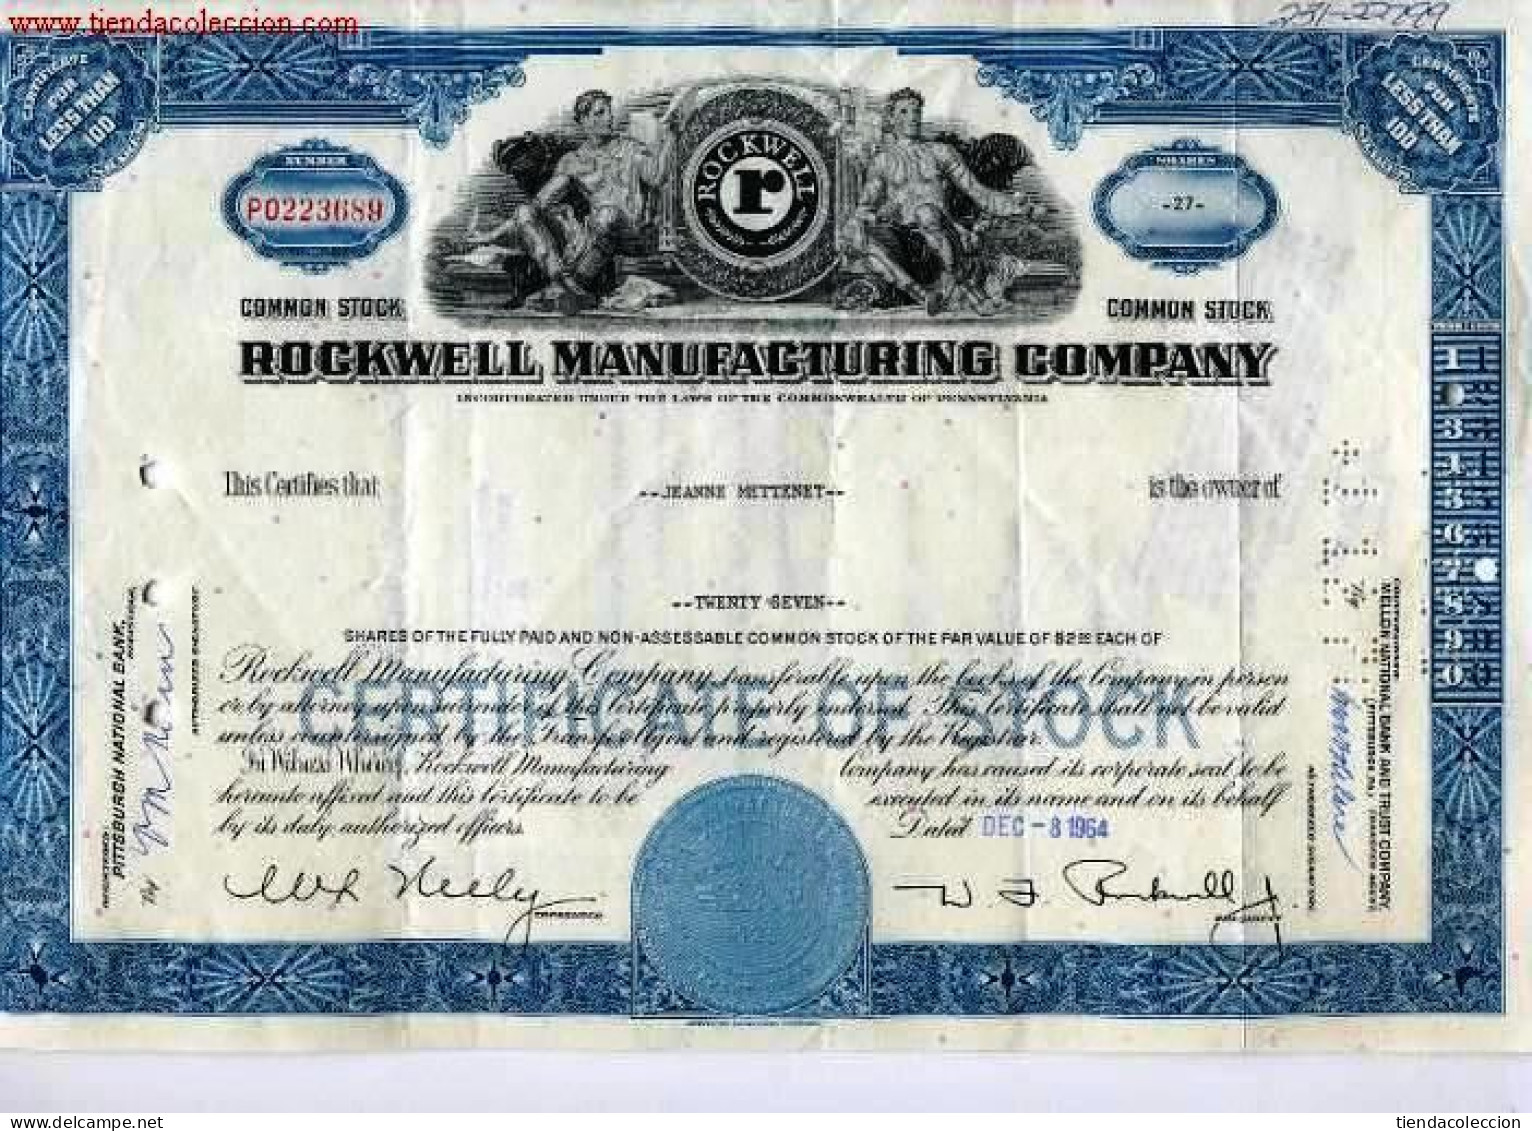 Rockwell Manufacturing Company - P - R